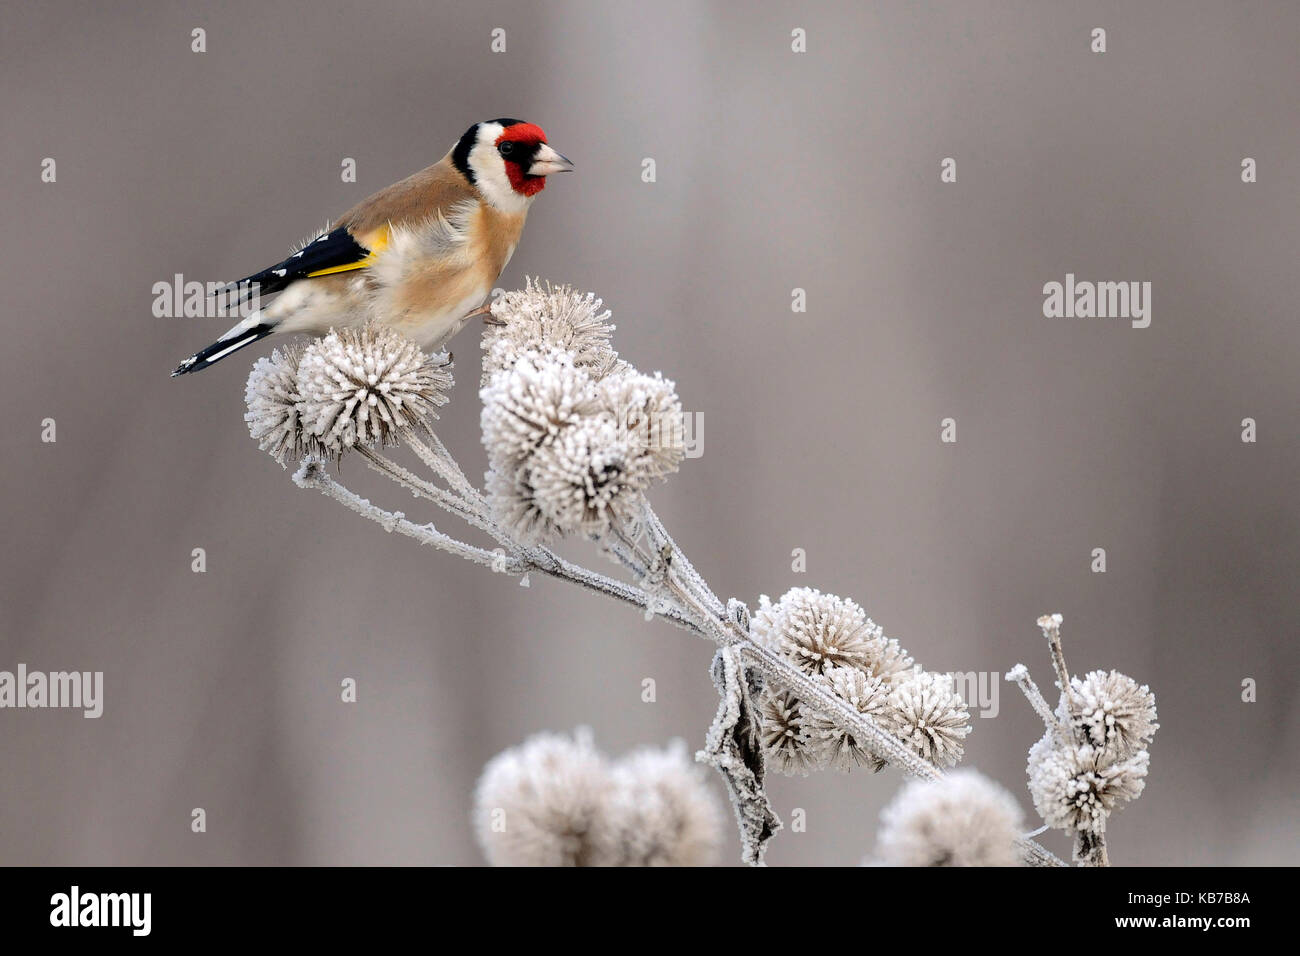 European Goldfinch (Carduelis carduelis) foraging on the seeds of a Burdock (Arctium sp.) thistle, The Netherlands Stock Photo